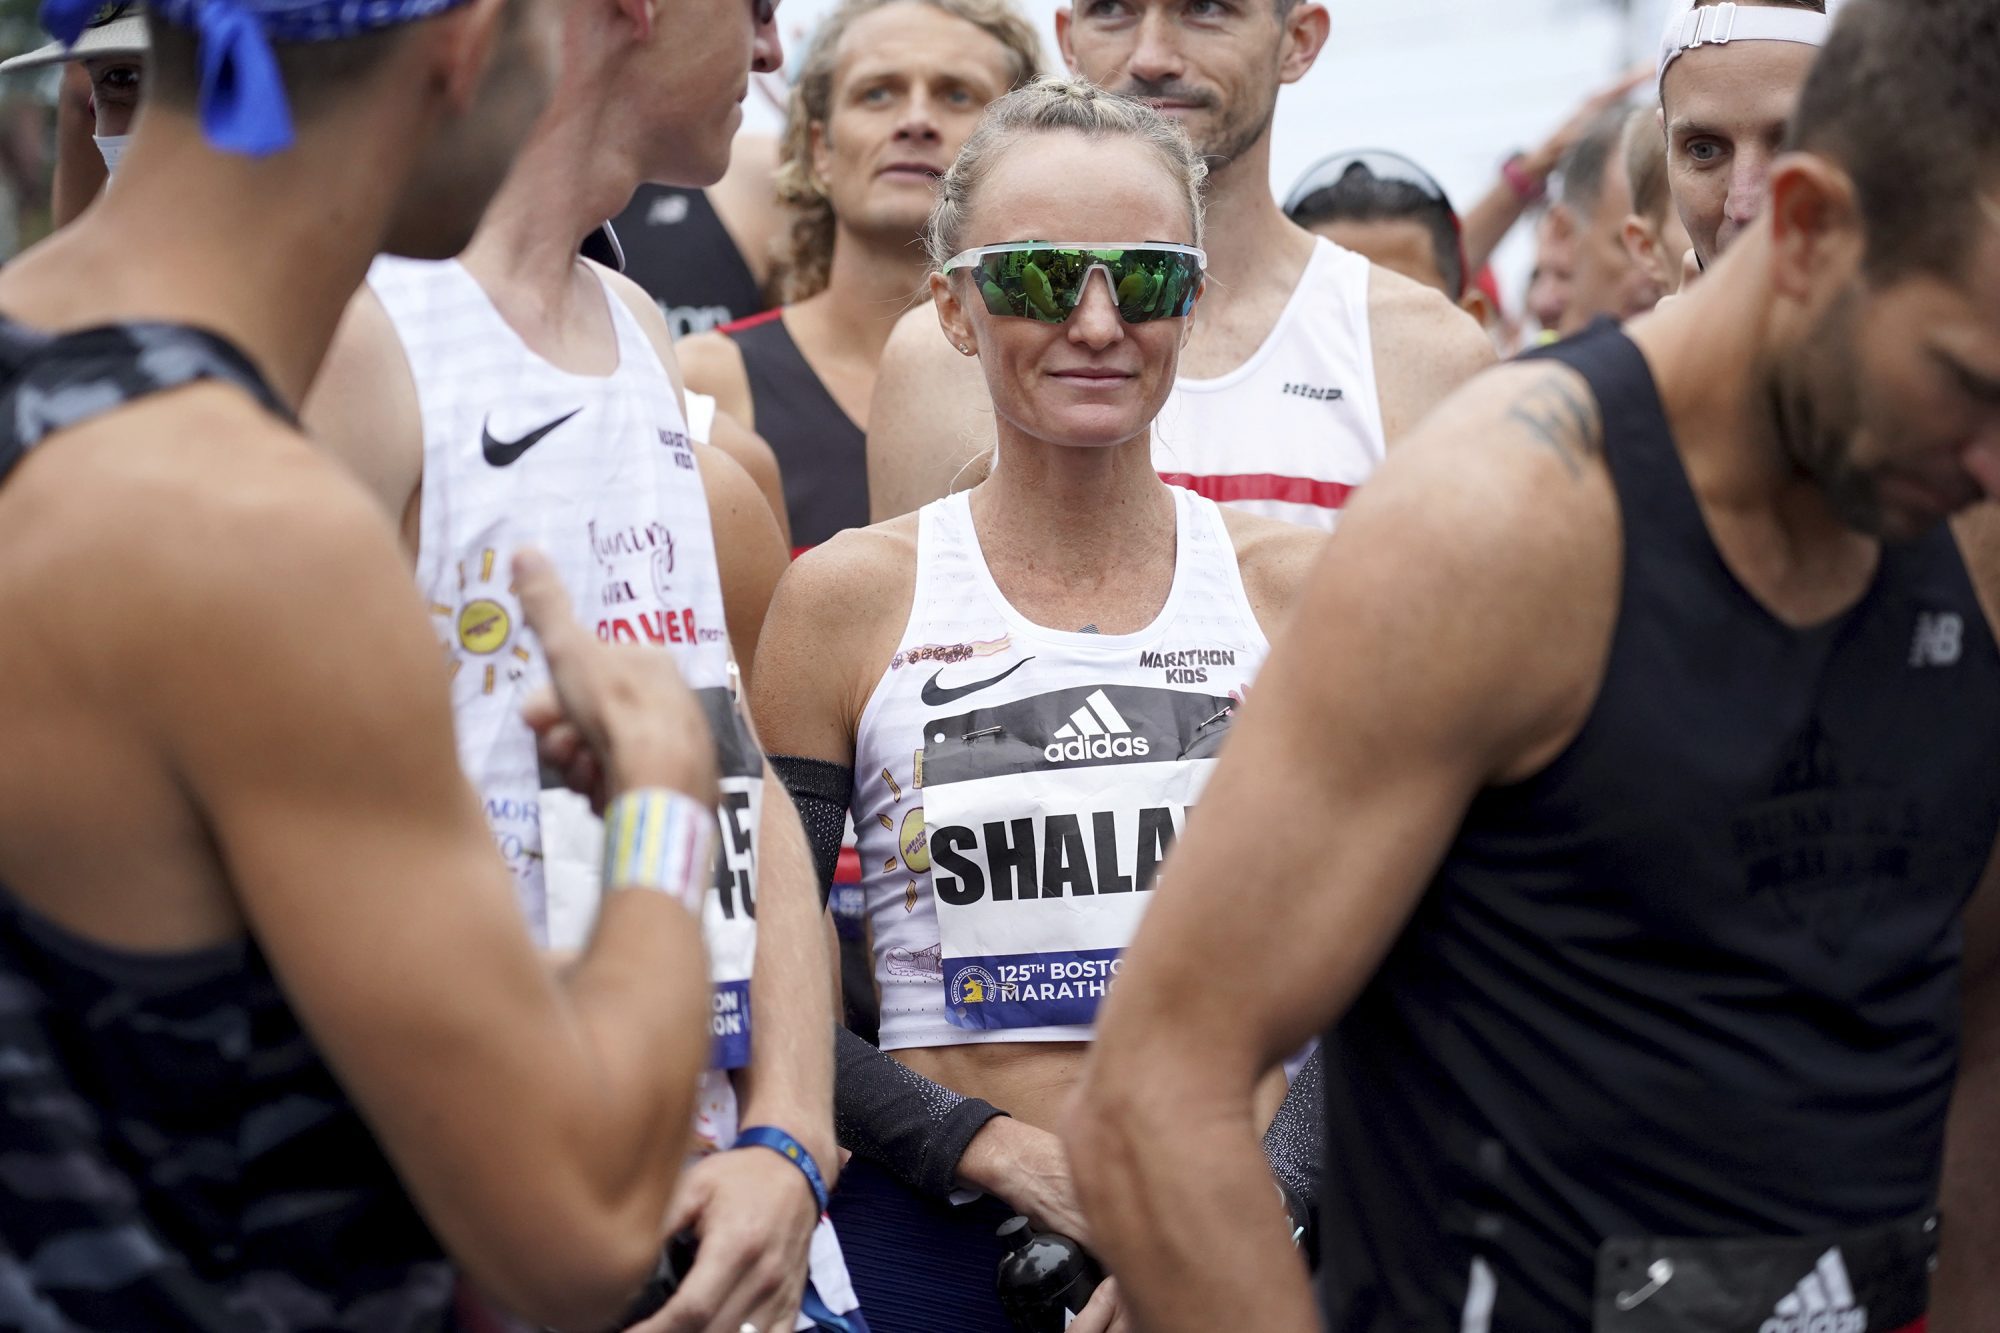 Two marathons in two days for Shalane Flanagan, and she's not done